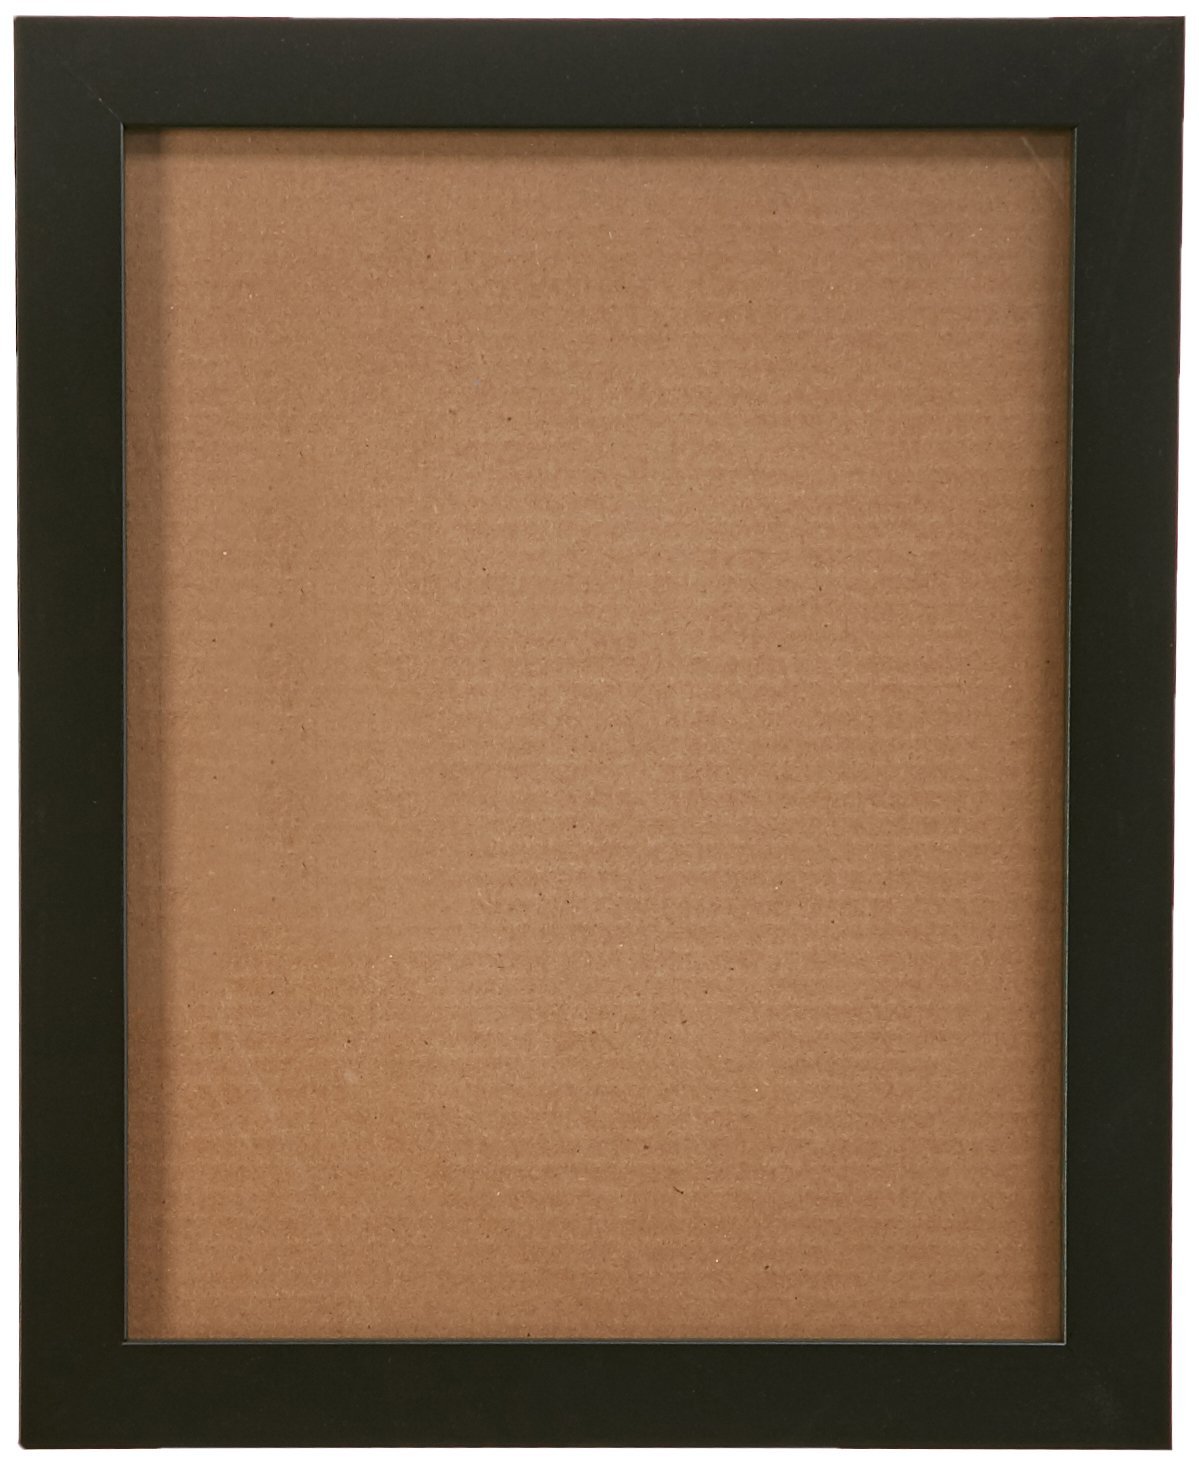 ArtToFrames 10x10 inch Black Picture Frame, WOMFRBW72079-10x10